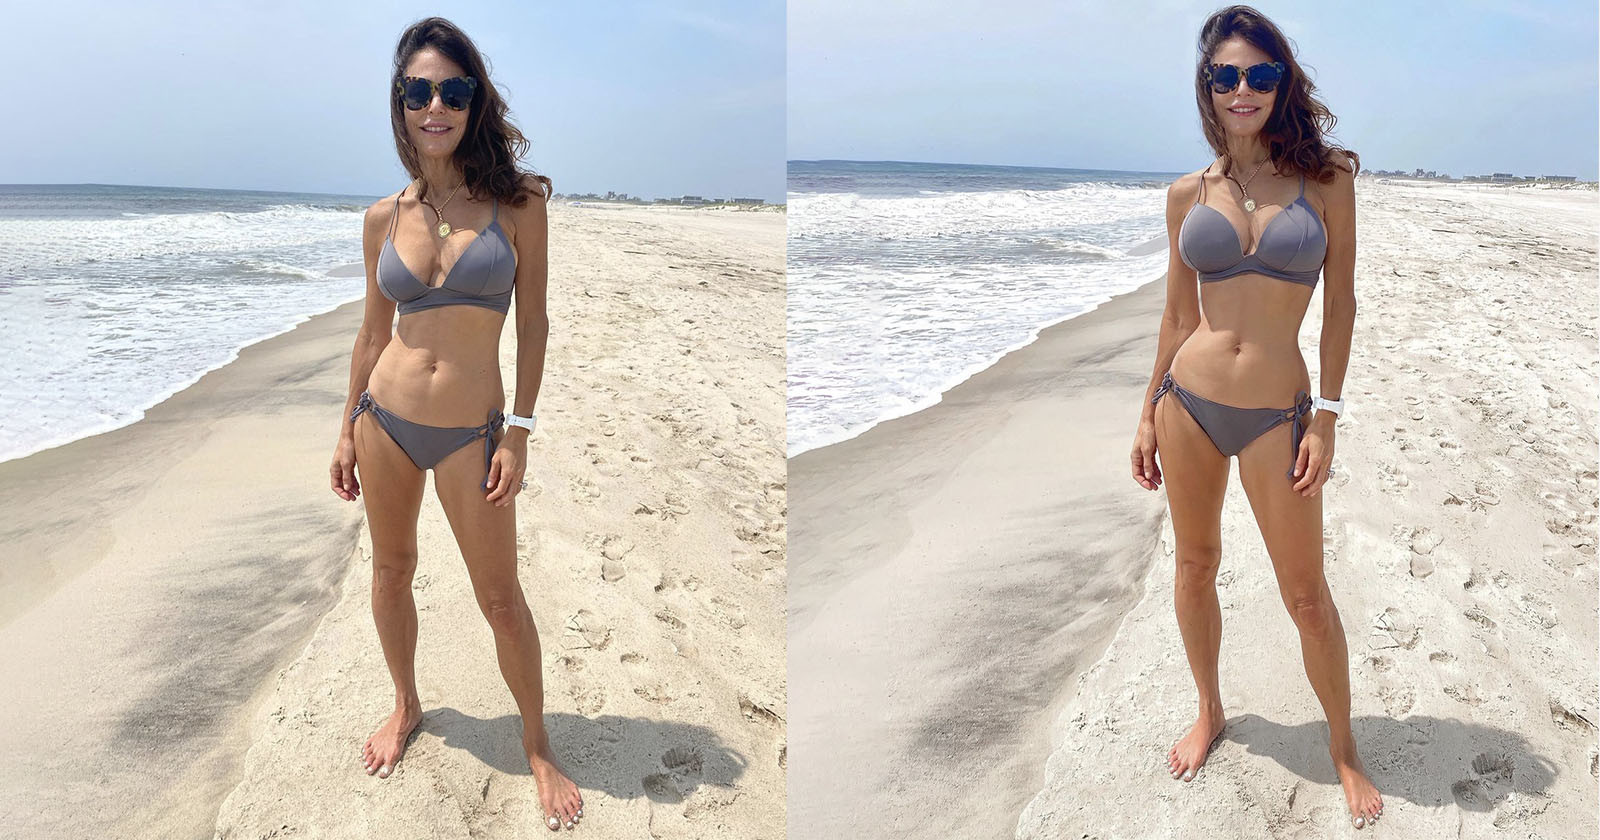  reality star photoshops herself show how deceptive social 